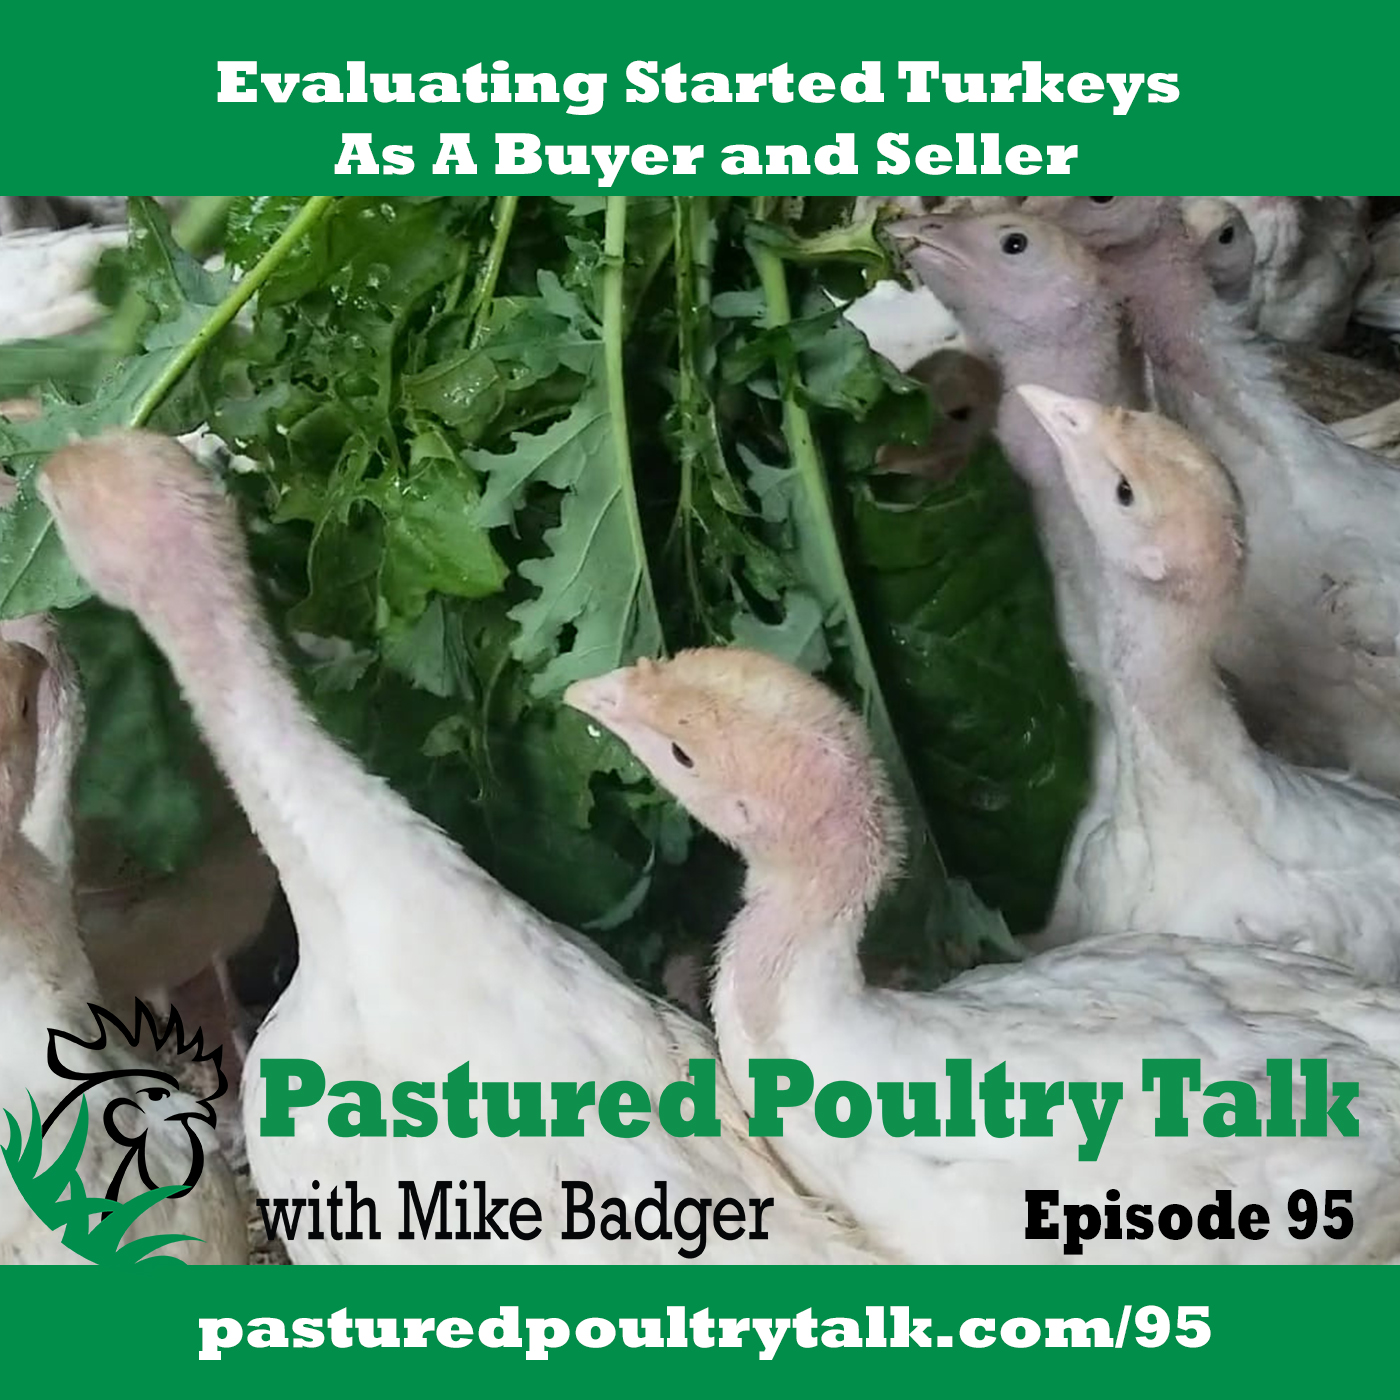 cover art for episode on evaluating started turkey business.